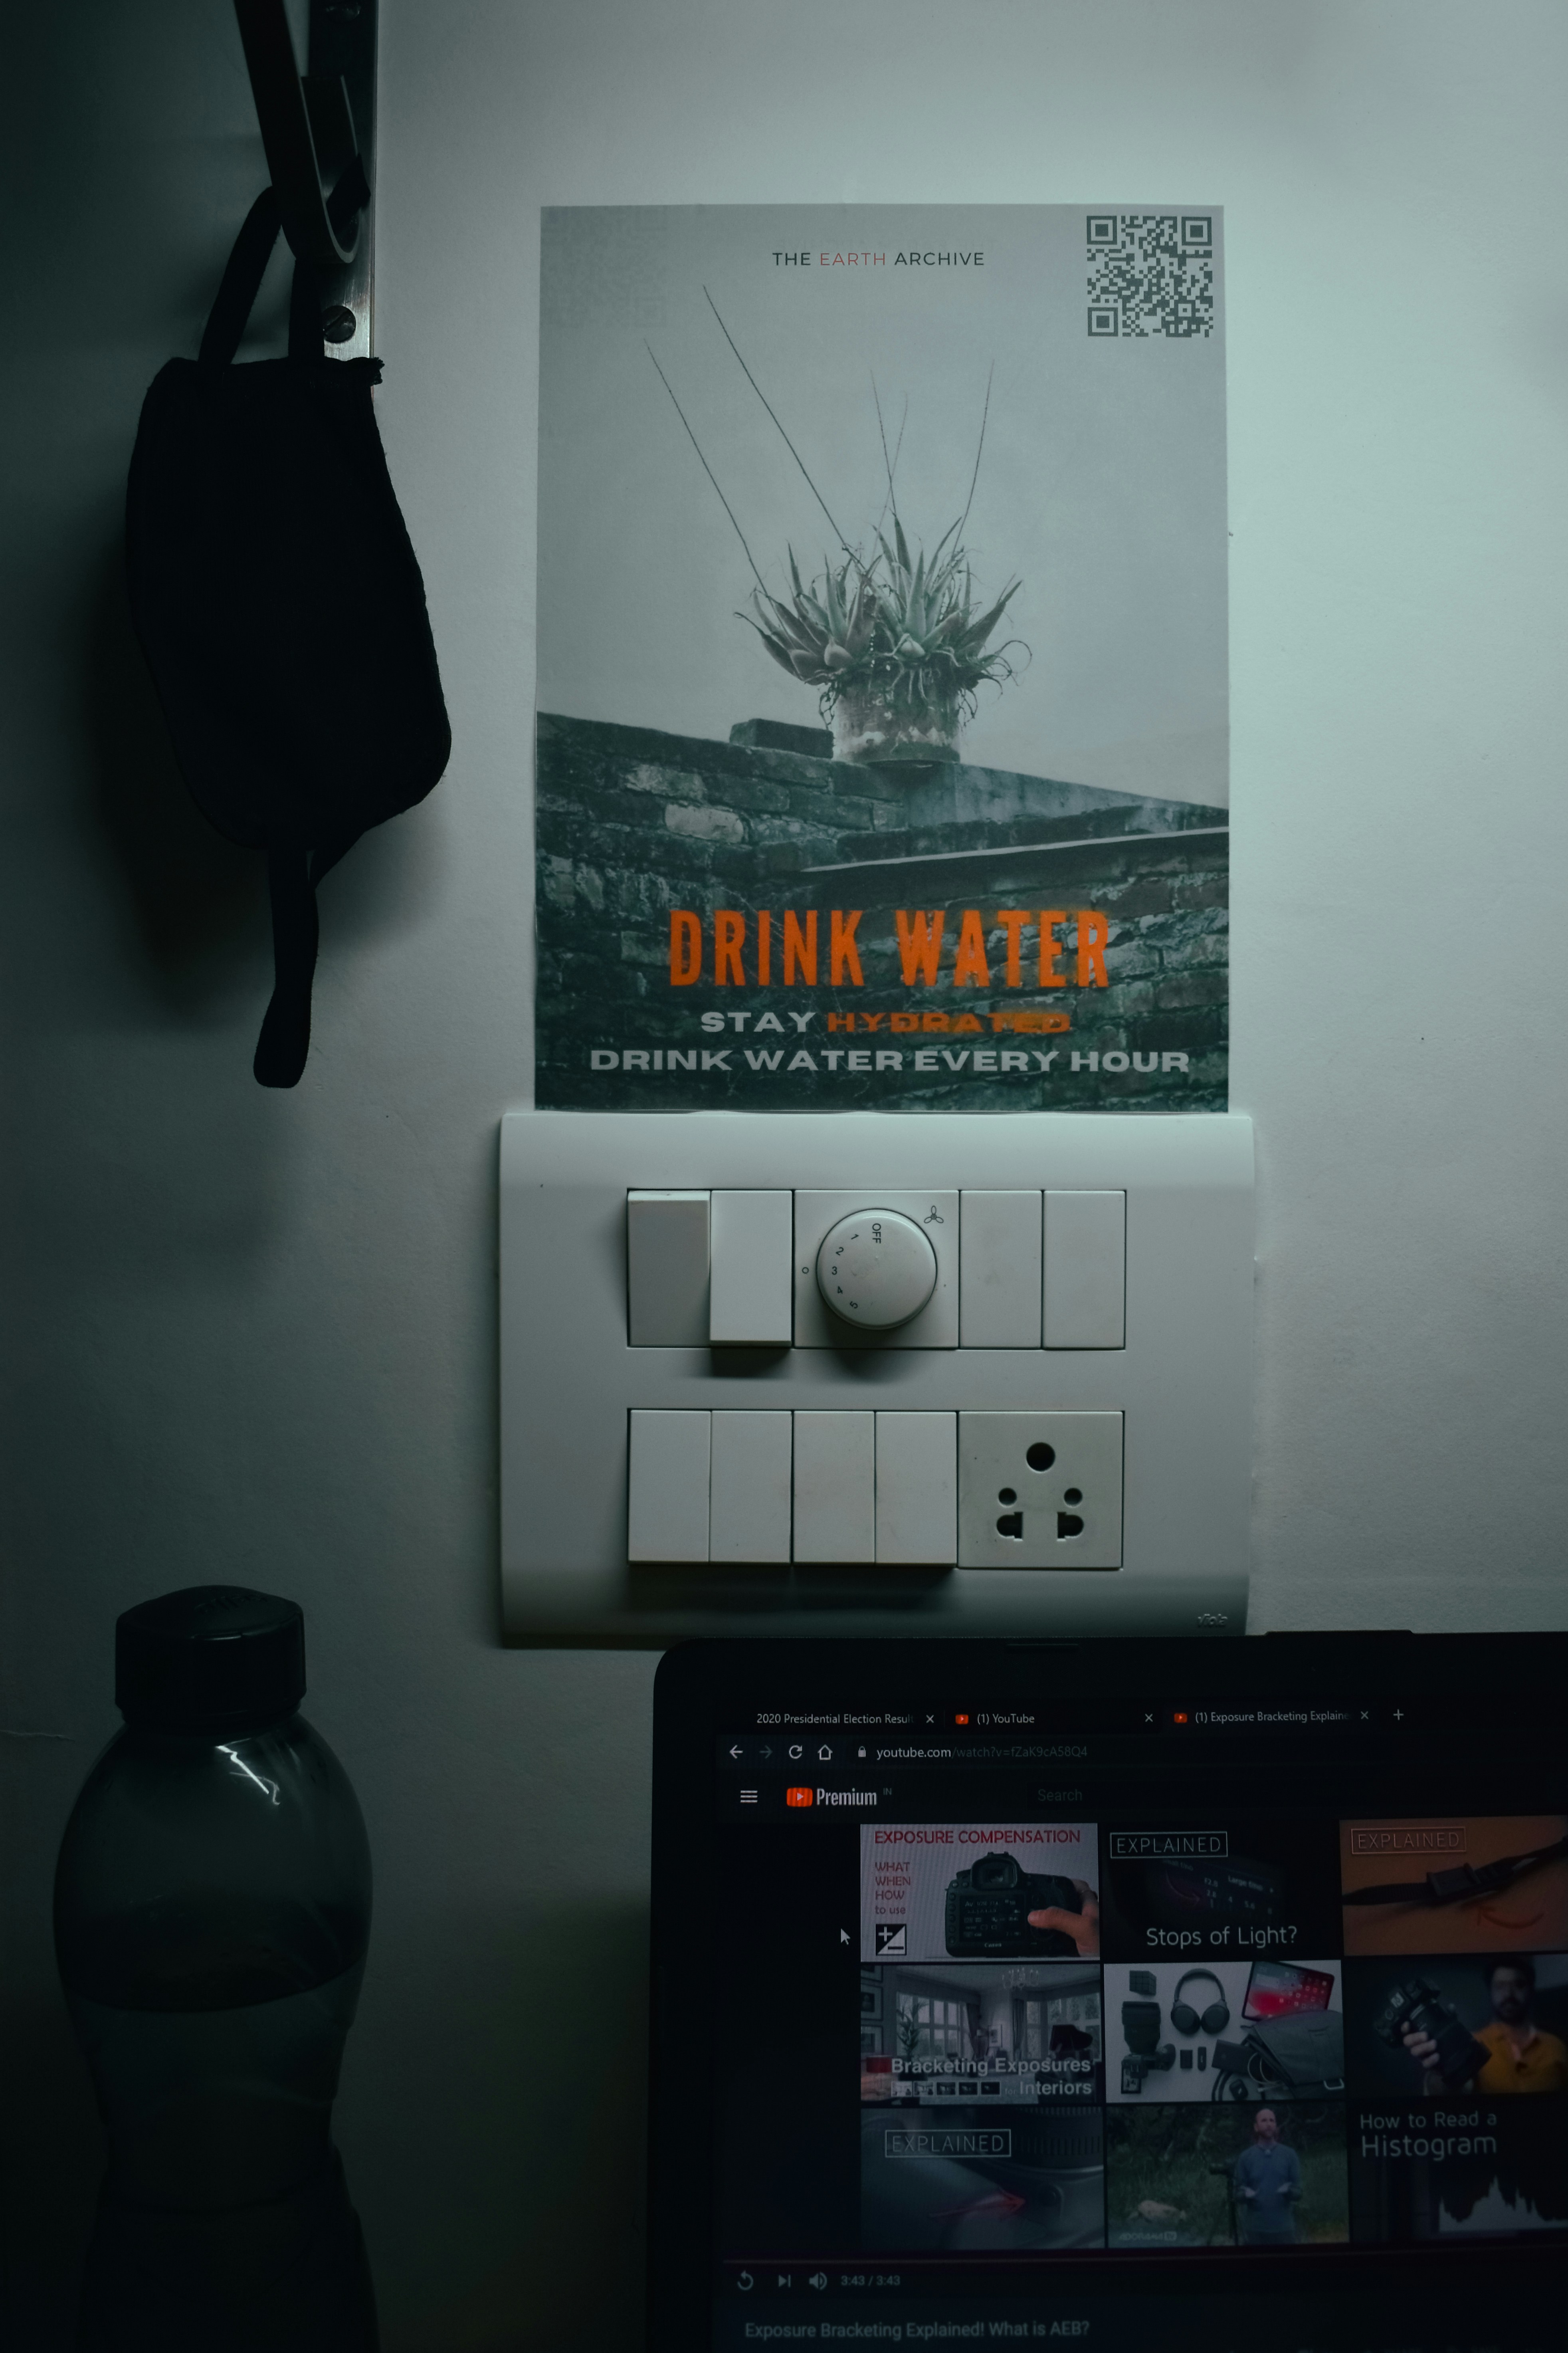 An open laptop with YouTube running, with a water bottle beside it and a mask hanging up. A poster advising to drink water is stuck on the wall.